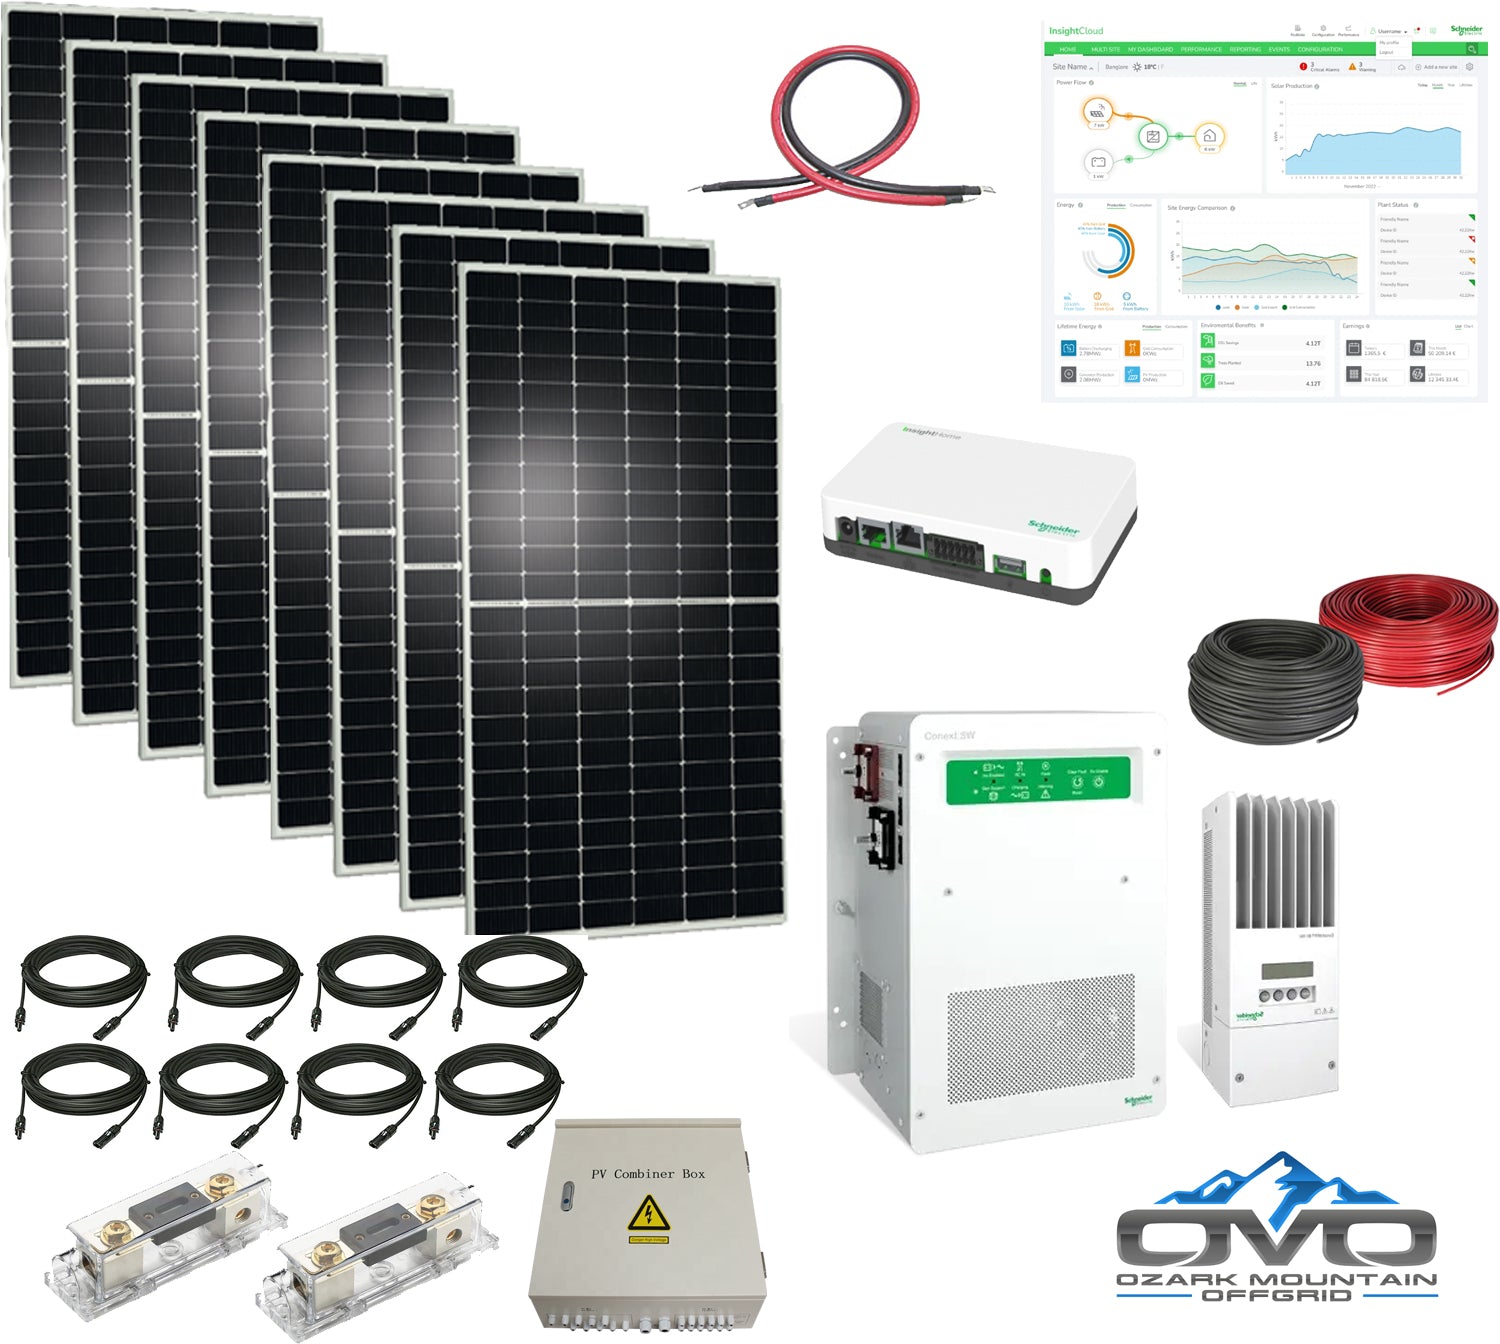 Kit solaire HuaWei 4000wh Autoconsommation Grid Injection